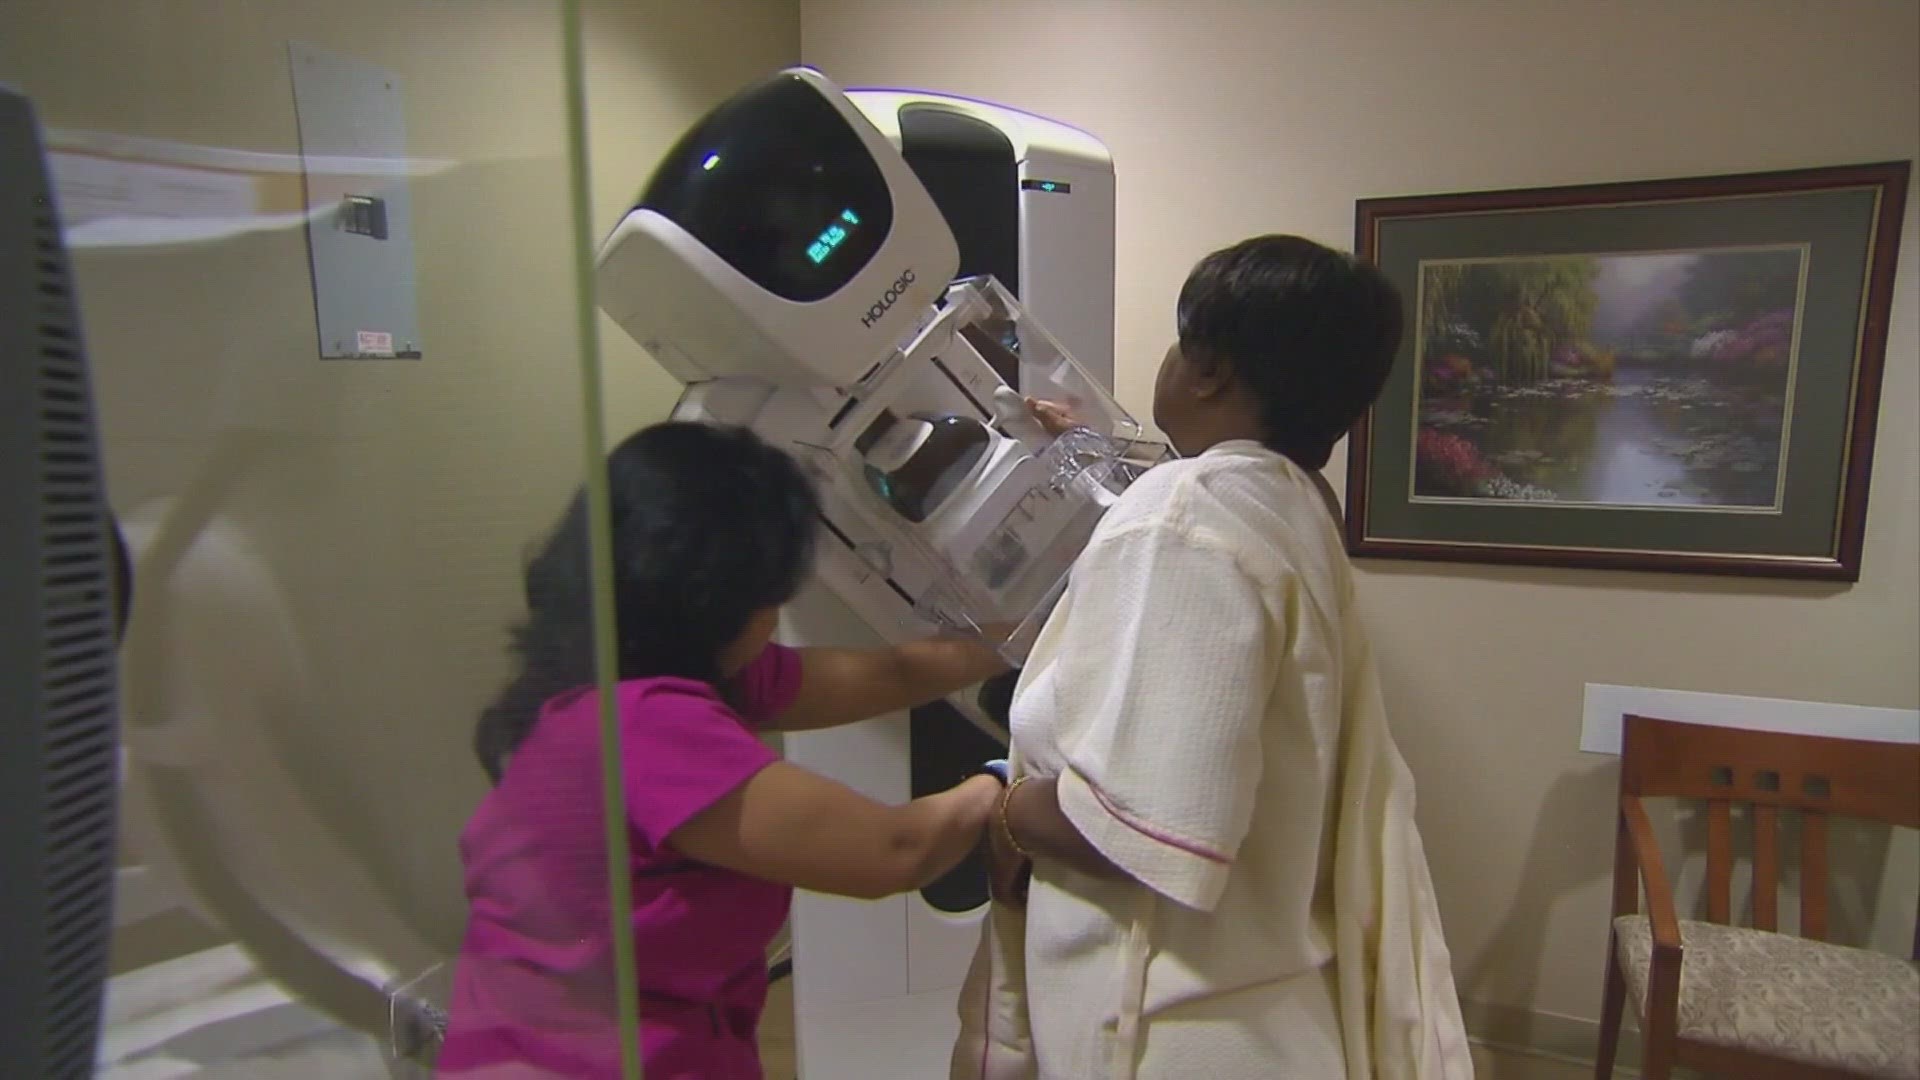 New recommendations for breast cancer screenings has been moved up about 10 years. Women with an average risk should get screenings at age 40 instead of 50.